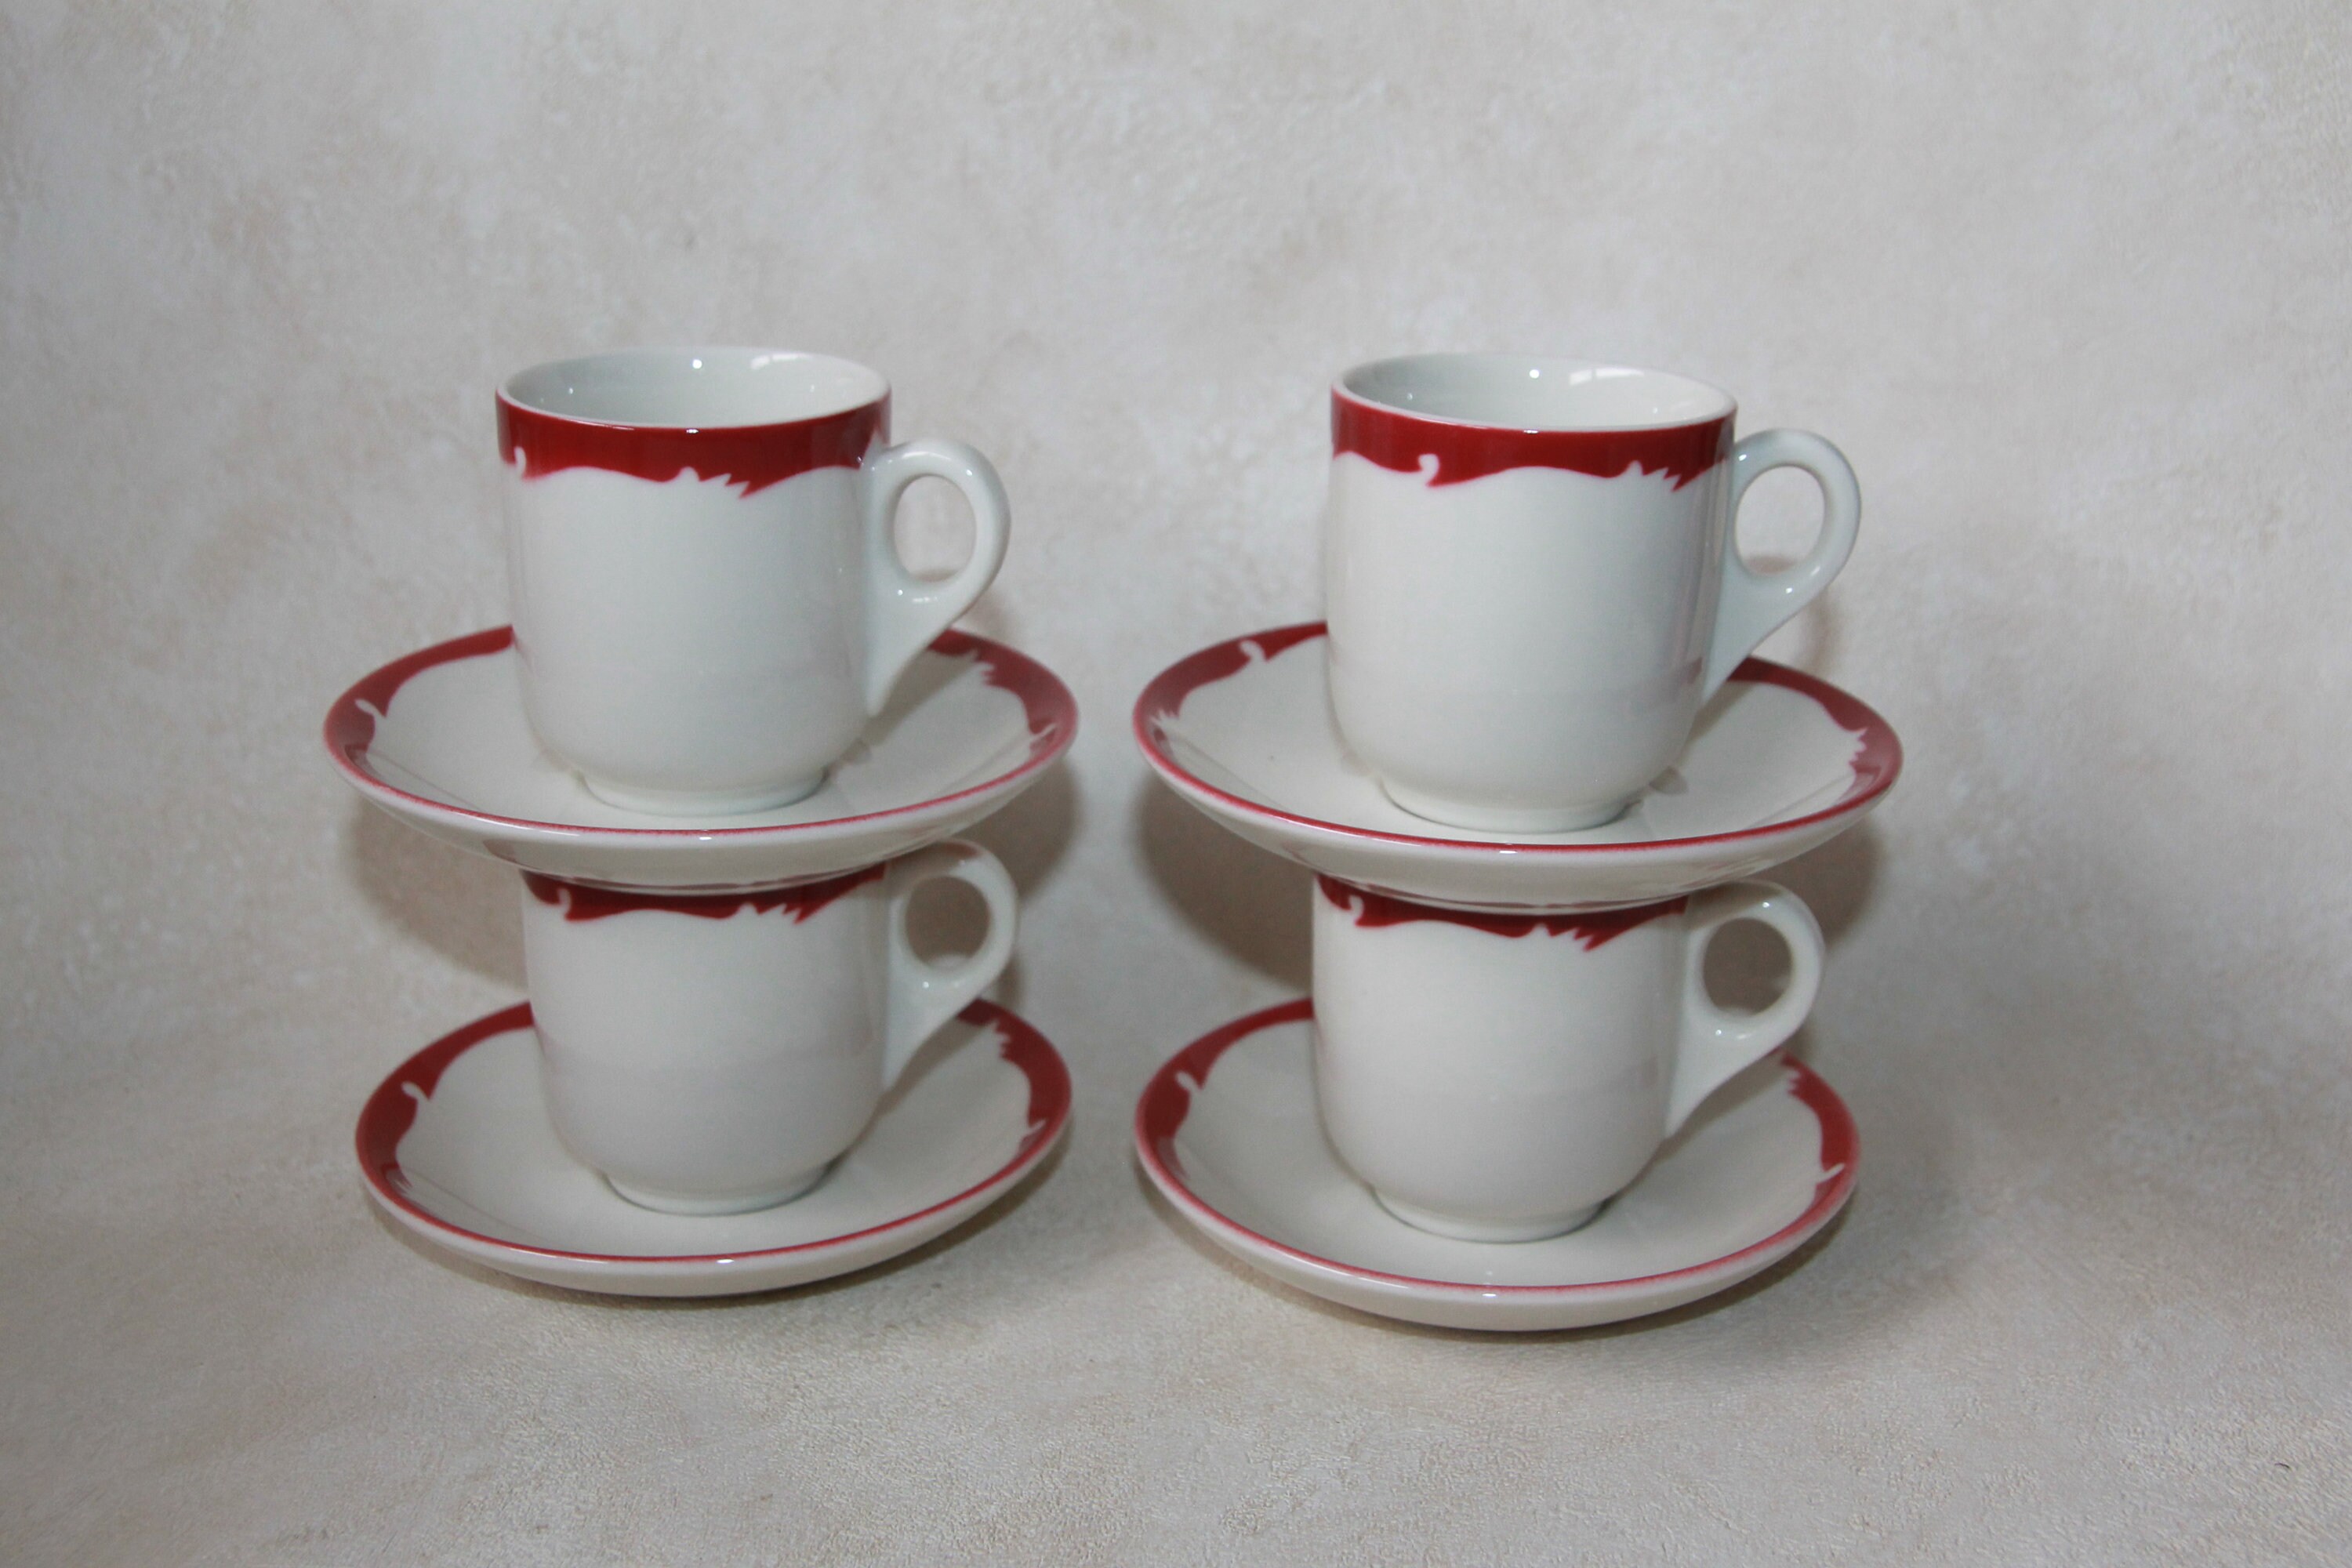 Ribbon, Small Espresso Cups and Saucers, Set of 6 Demitasse Cups, Turkish  Coffee Cups, Espresso Set,…See more Ribbon, Small Espresso Cups and  Saucers